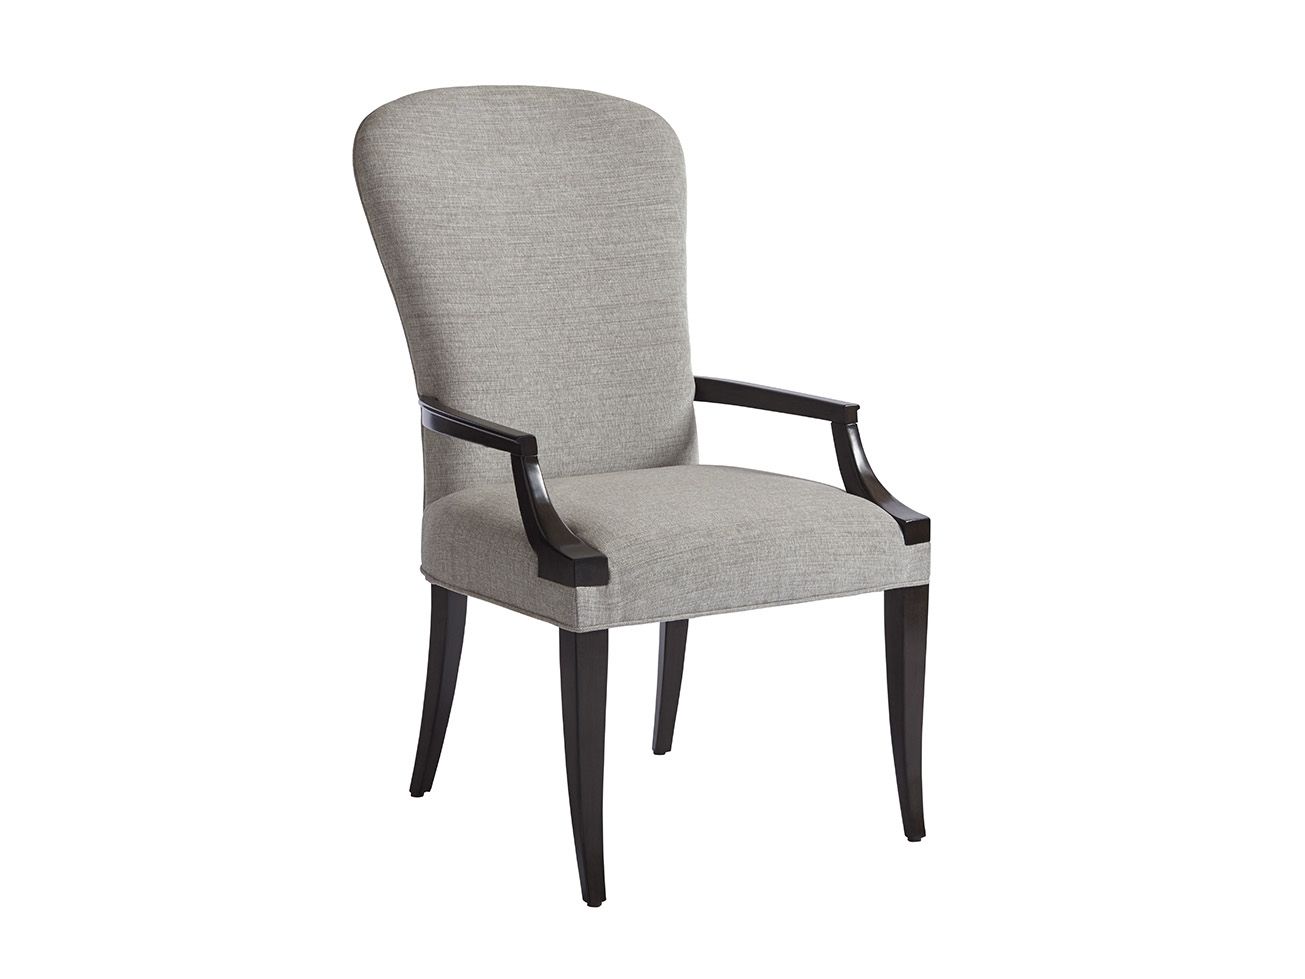 Candice Ii Slat Back Host Chairs Inside Well Liked Product List (View 10 of 20)